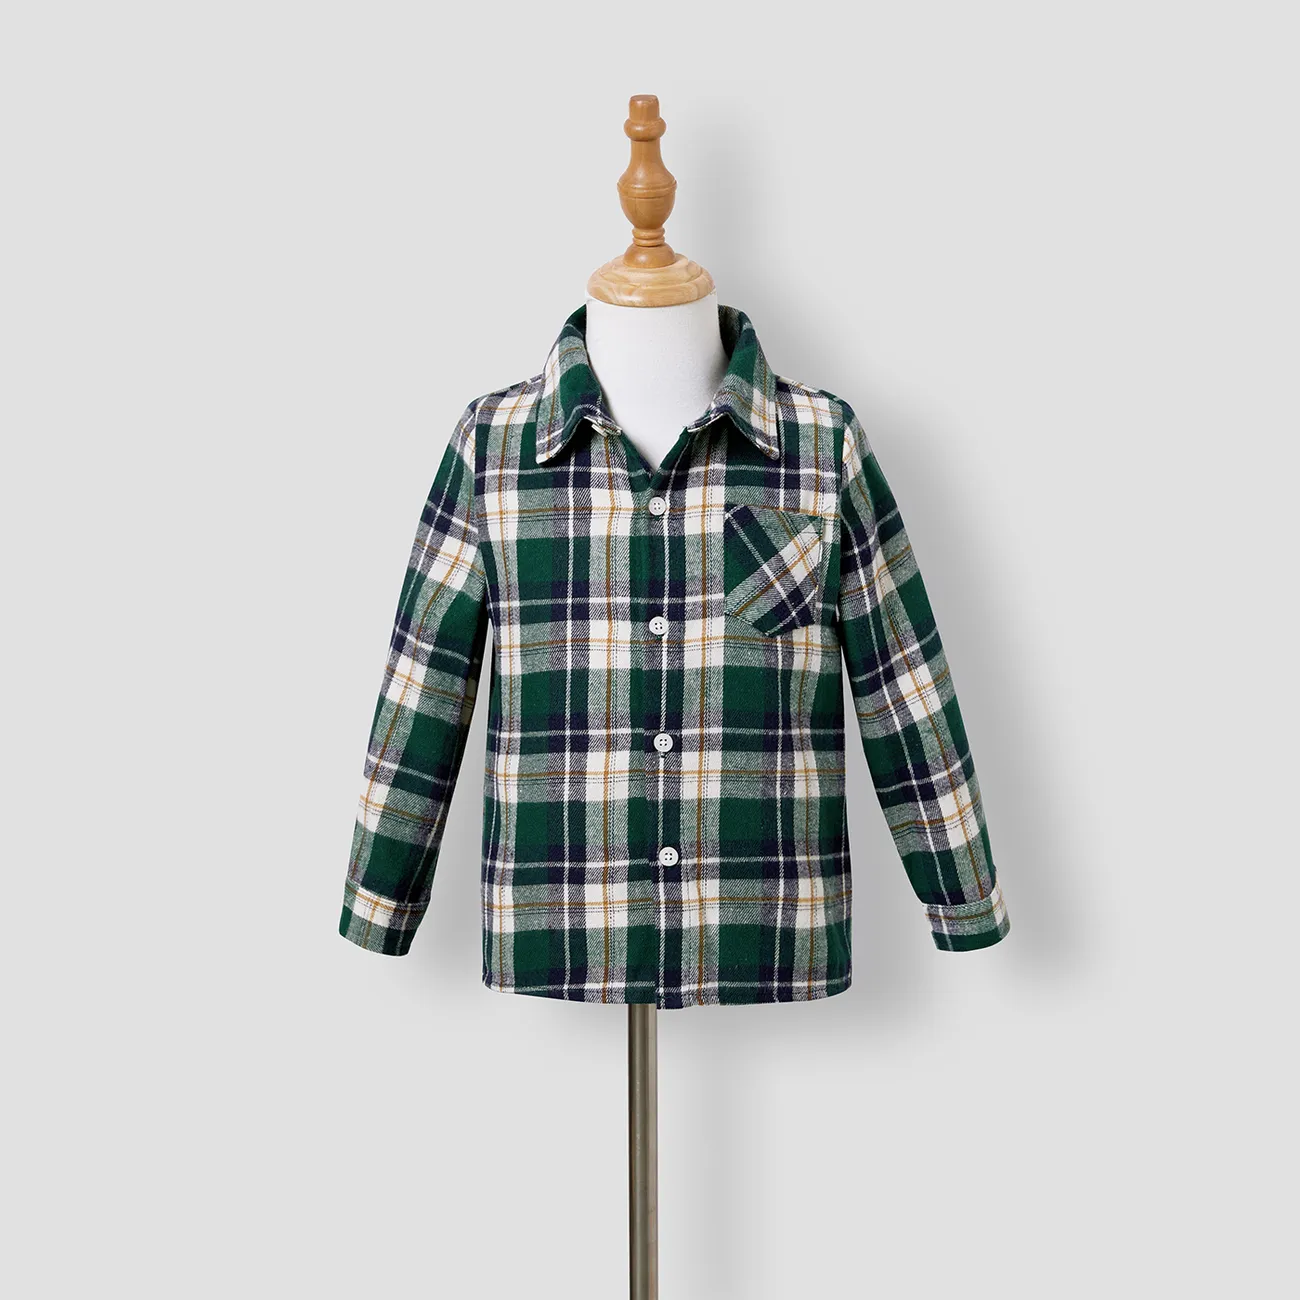 Family Matching Long-sleeve Mesh Splice Belted Dresses and Plaid Shirts Sets Green big image 1